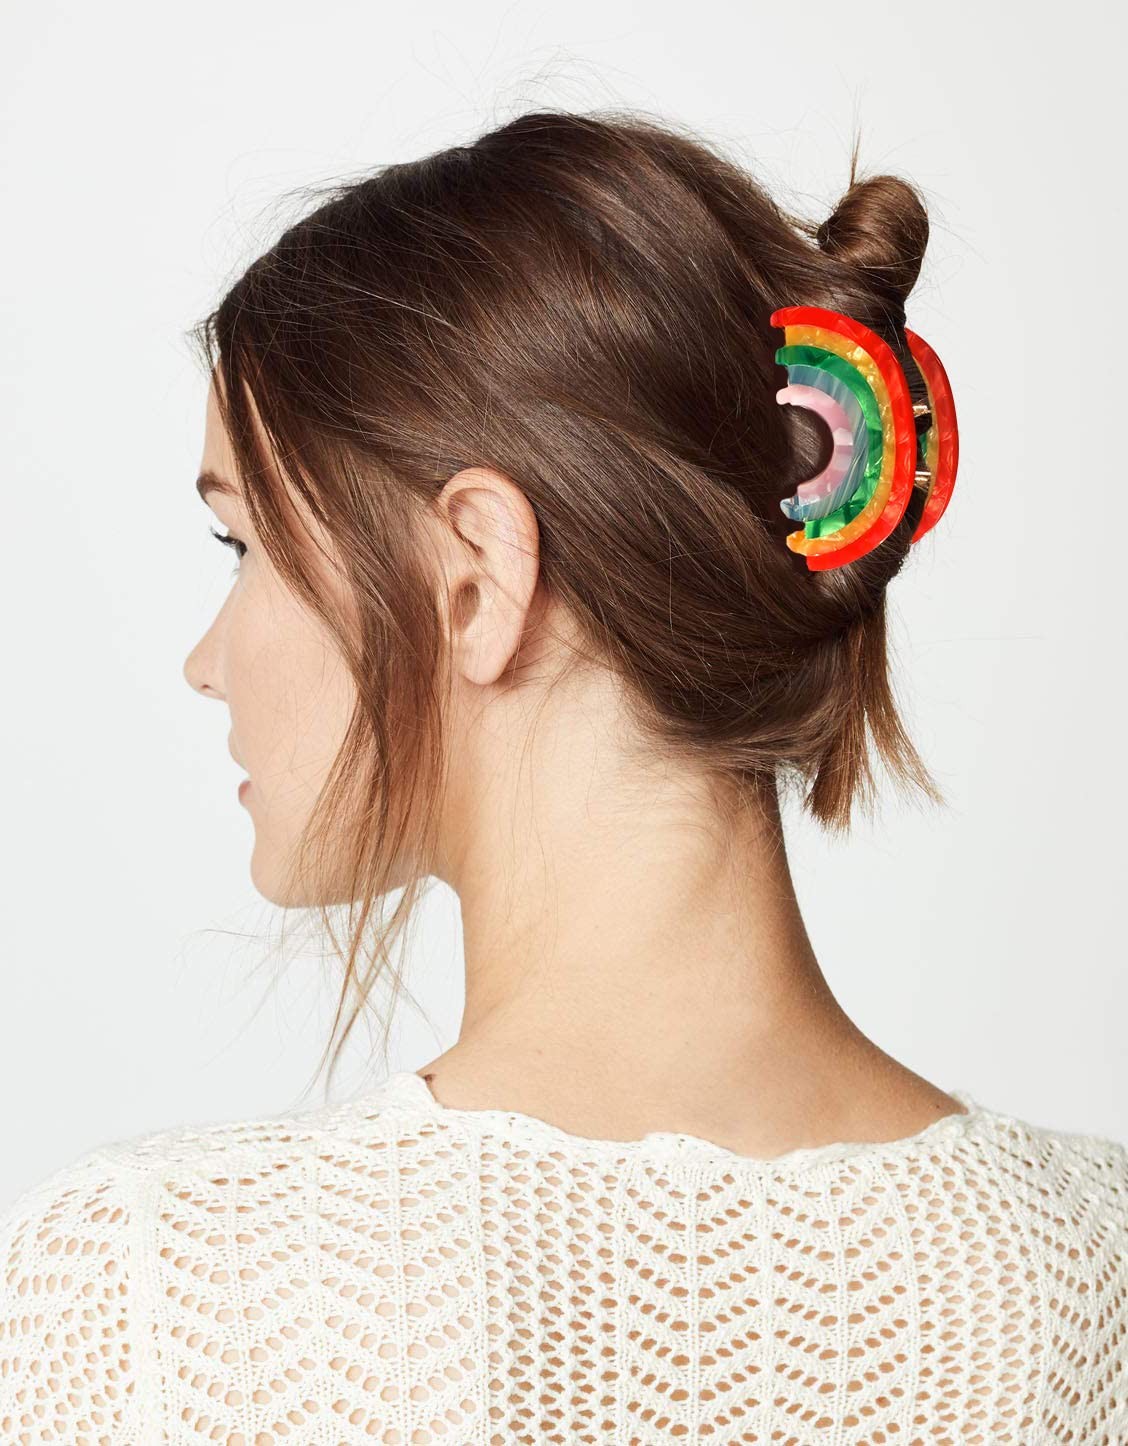 Bedazzling your hair has never been easier wirh this hair